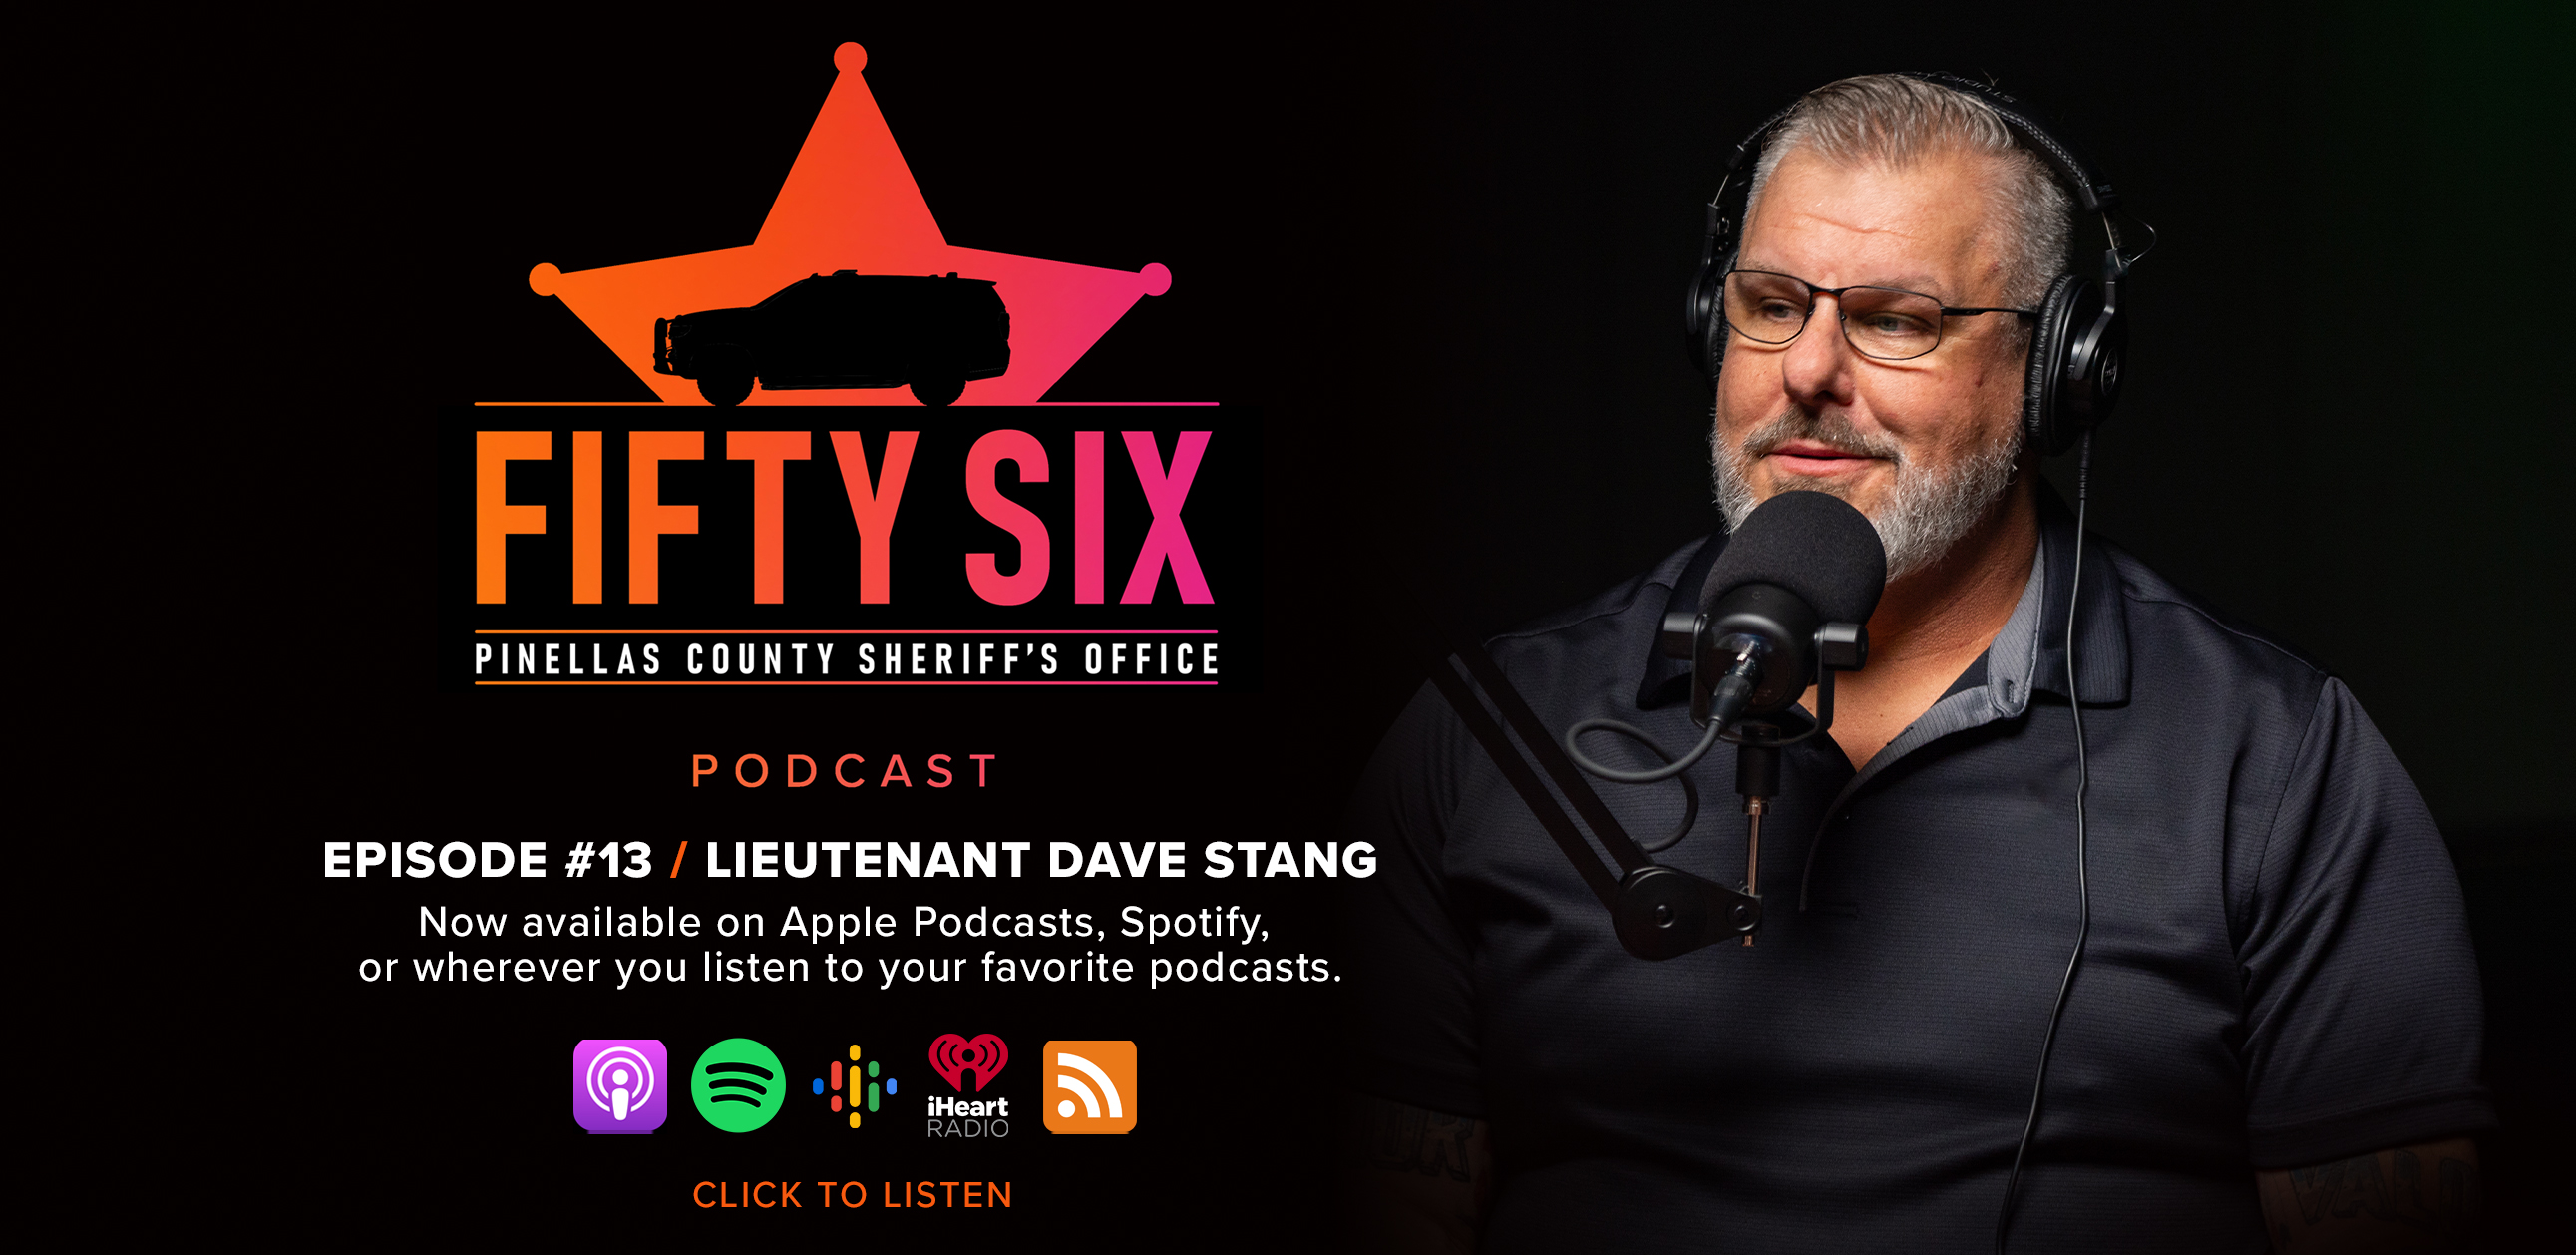 56 Podcast, Episode 13 Lieutenant Dave Stang, now available wherever you listen to your favorite podcasts.